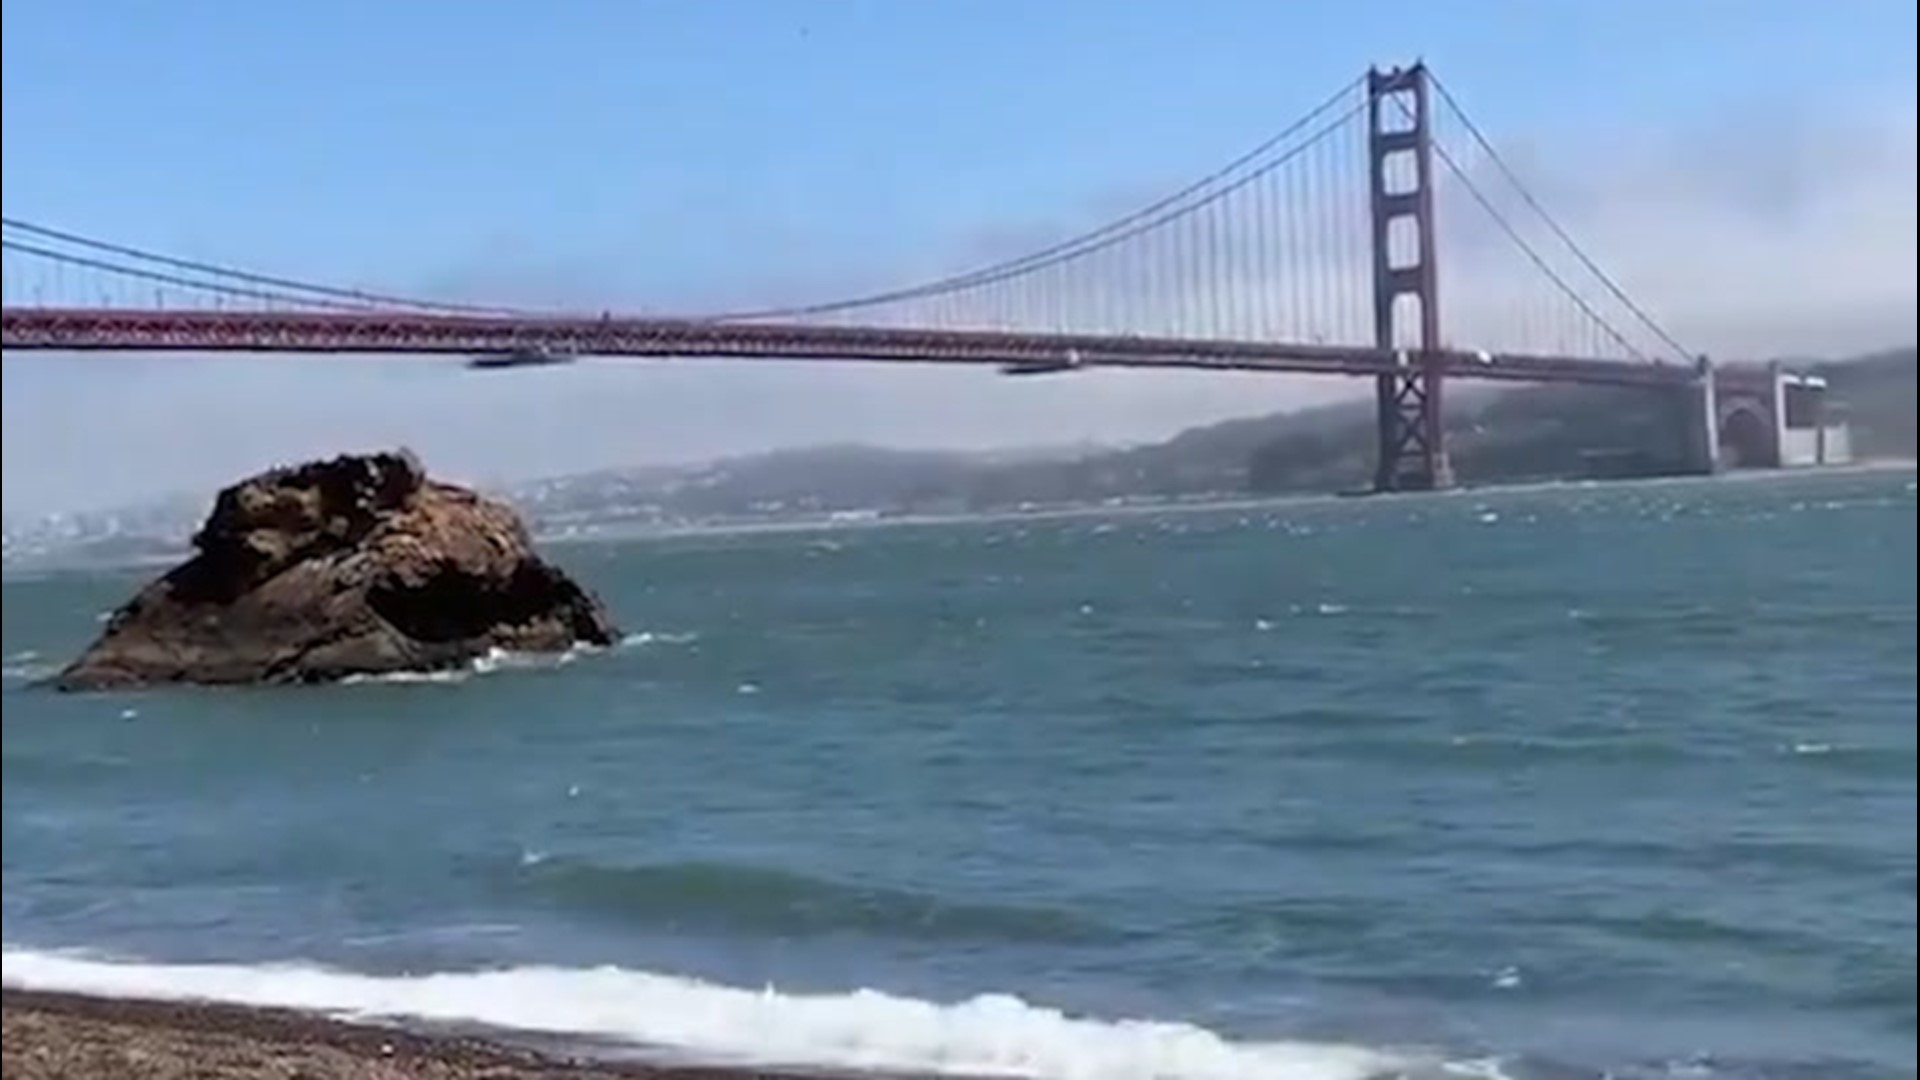 Thanks to new railings installed along the Golden Gate Bridge, high wind in San Francisco now creates a ghostly sounding harmonica-like sound from the landmark, heard for miles in all directions.